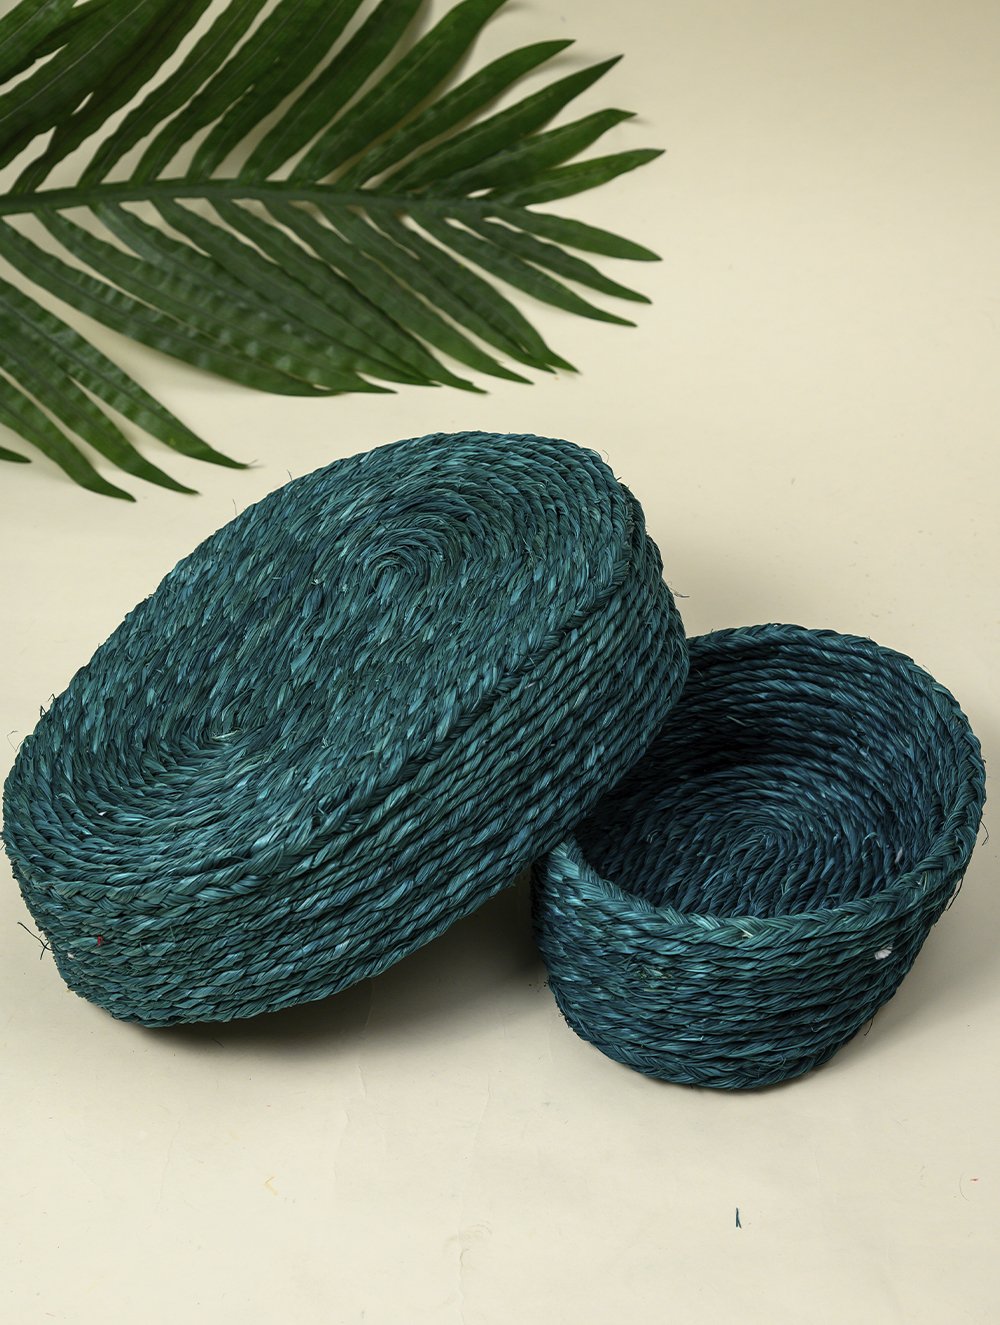 Load image into Gallery viewer, Handcrafted Sabai Grass Multi-Utility Baskets - Dark Teal Blue (Set of 2)